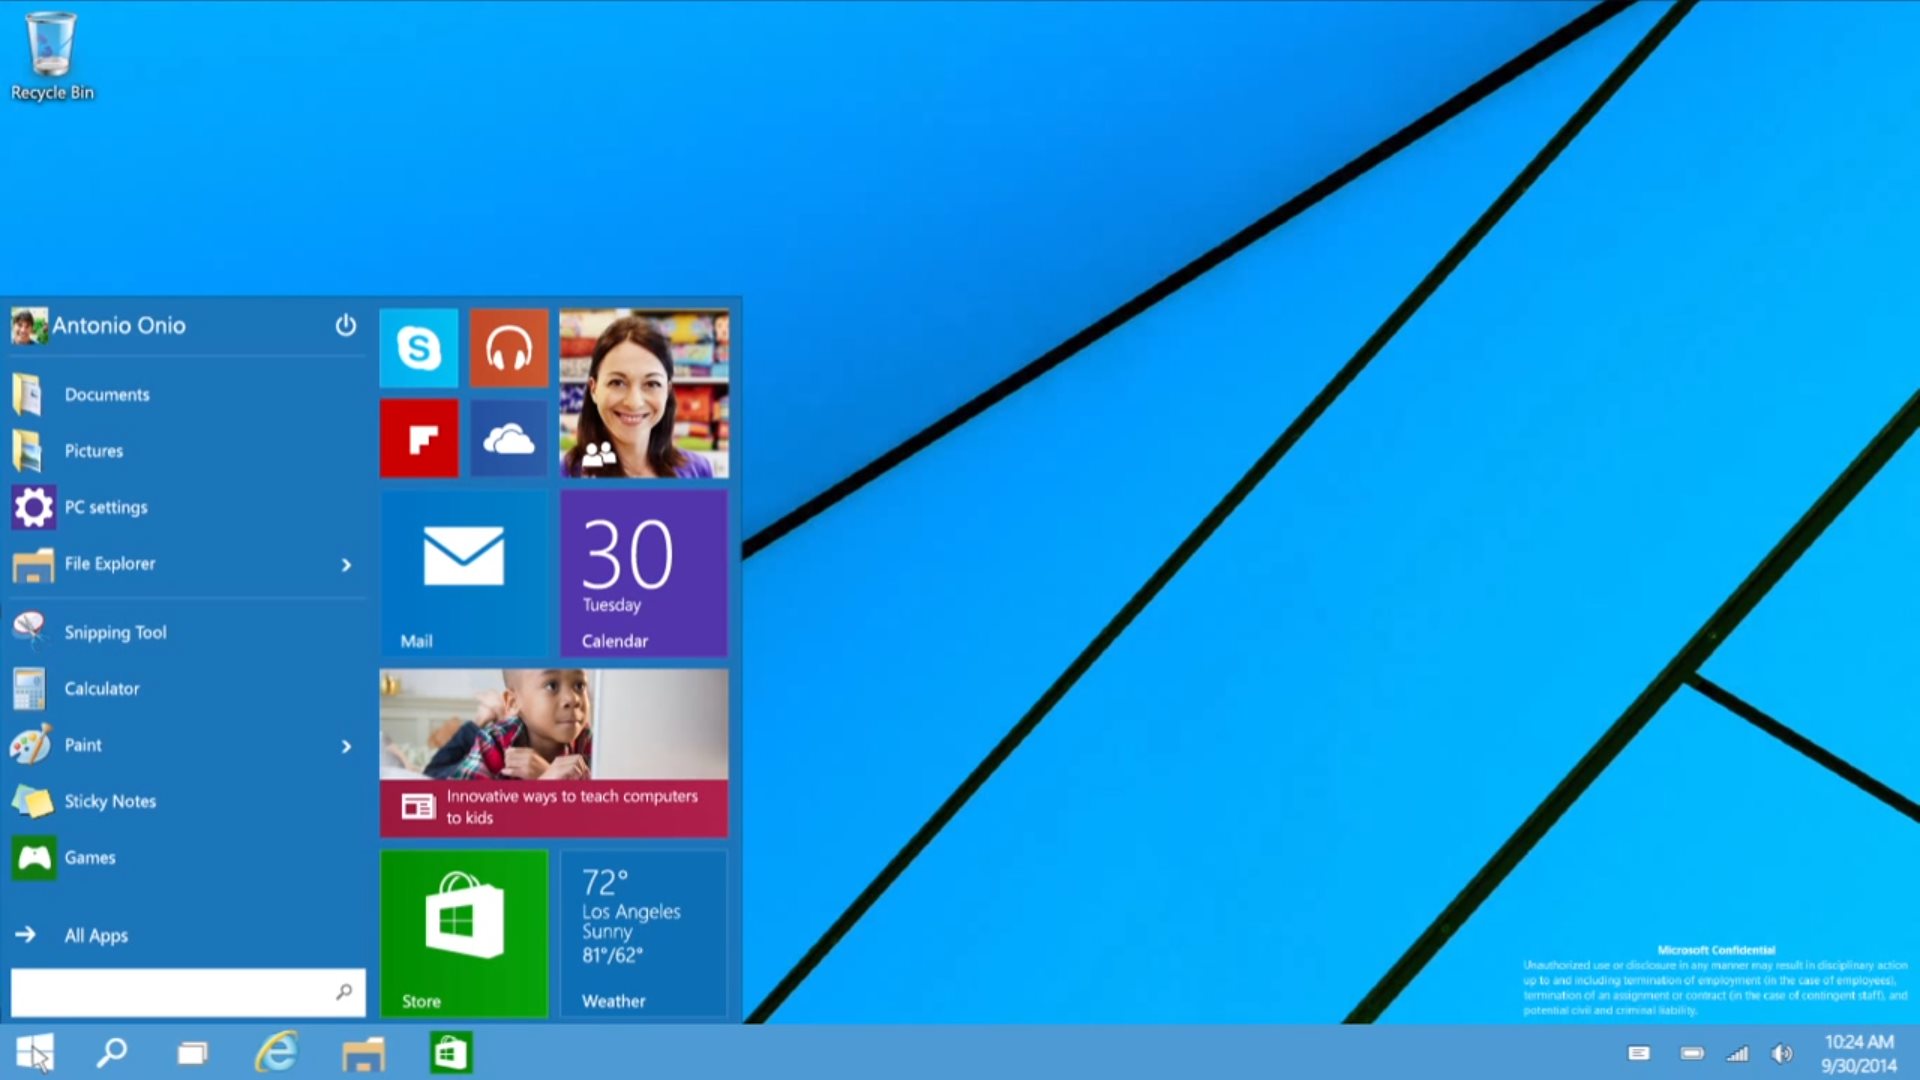 Windows 10 Continuum Revealed in Official Video   Softpedia 1920x1080